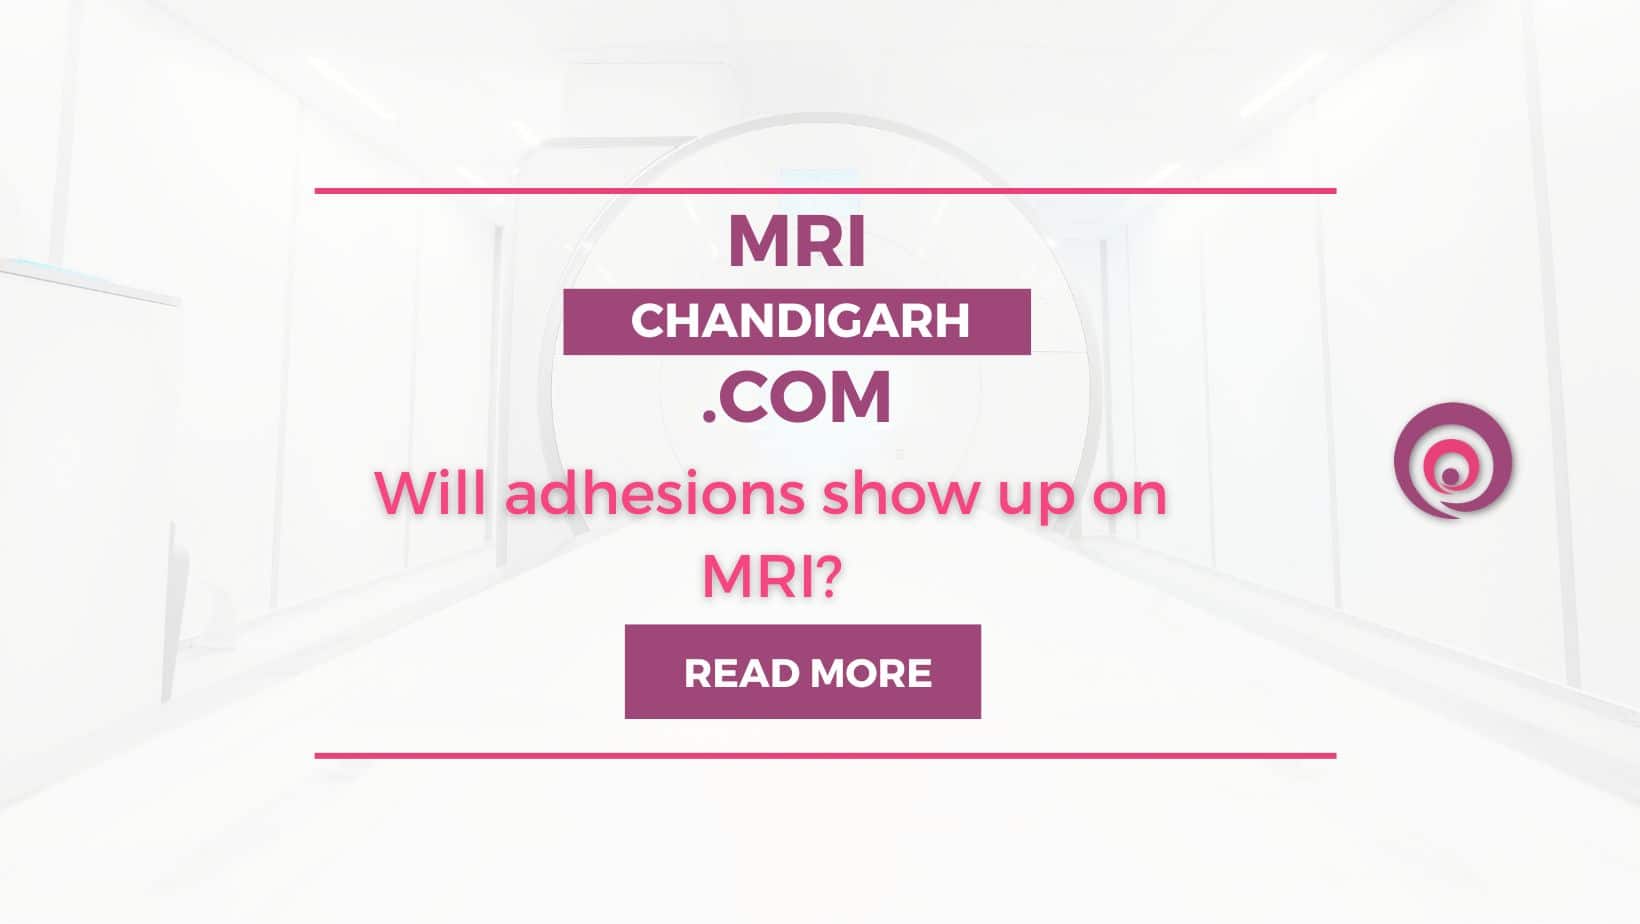 Will adhesions show up on MRI?